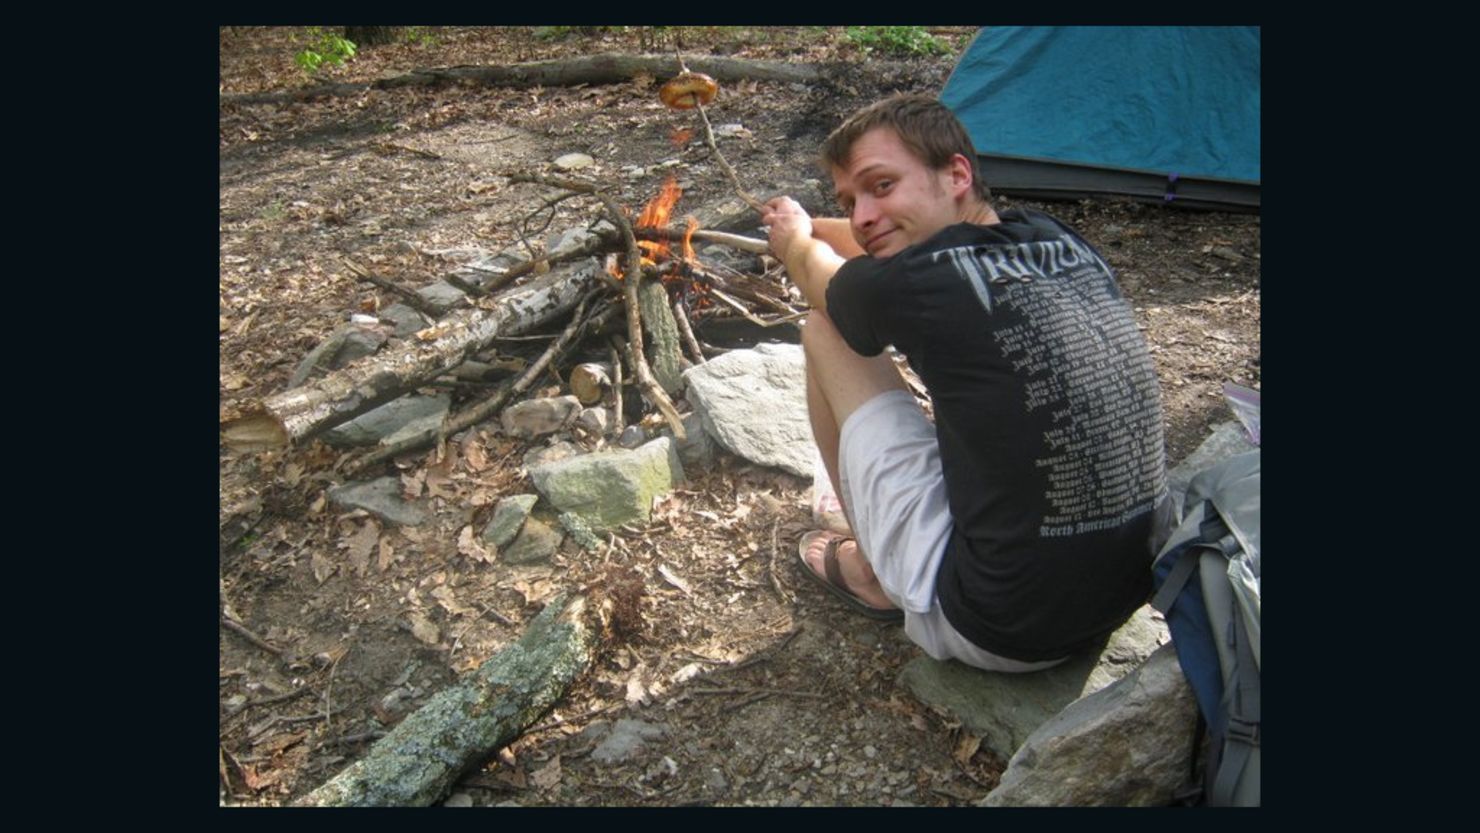 Peter Lapa-Lilly, then 23, on the Appalachian Trail in Maryland in fall 2010. He died from a self-inflicted gunshot on April 13, 2012.